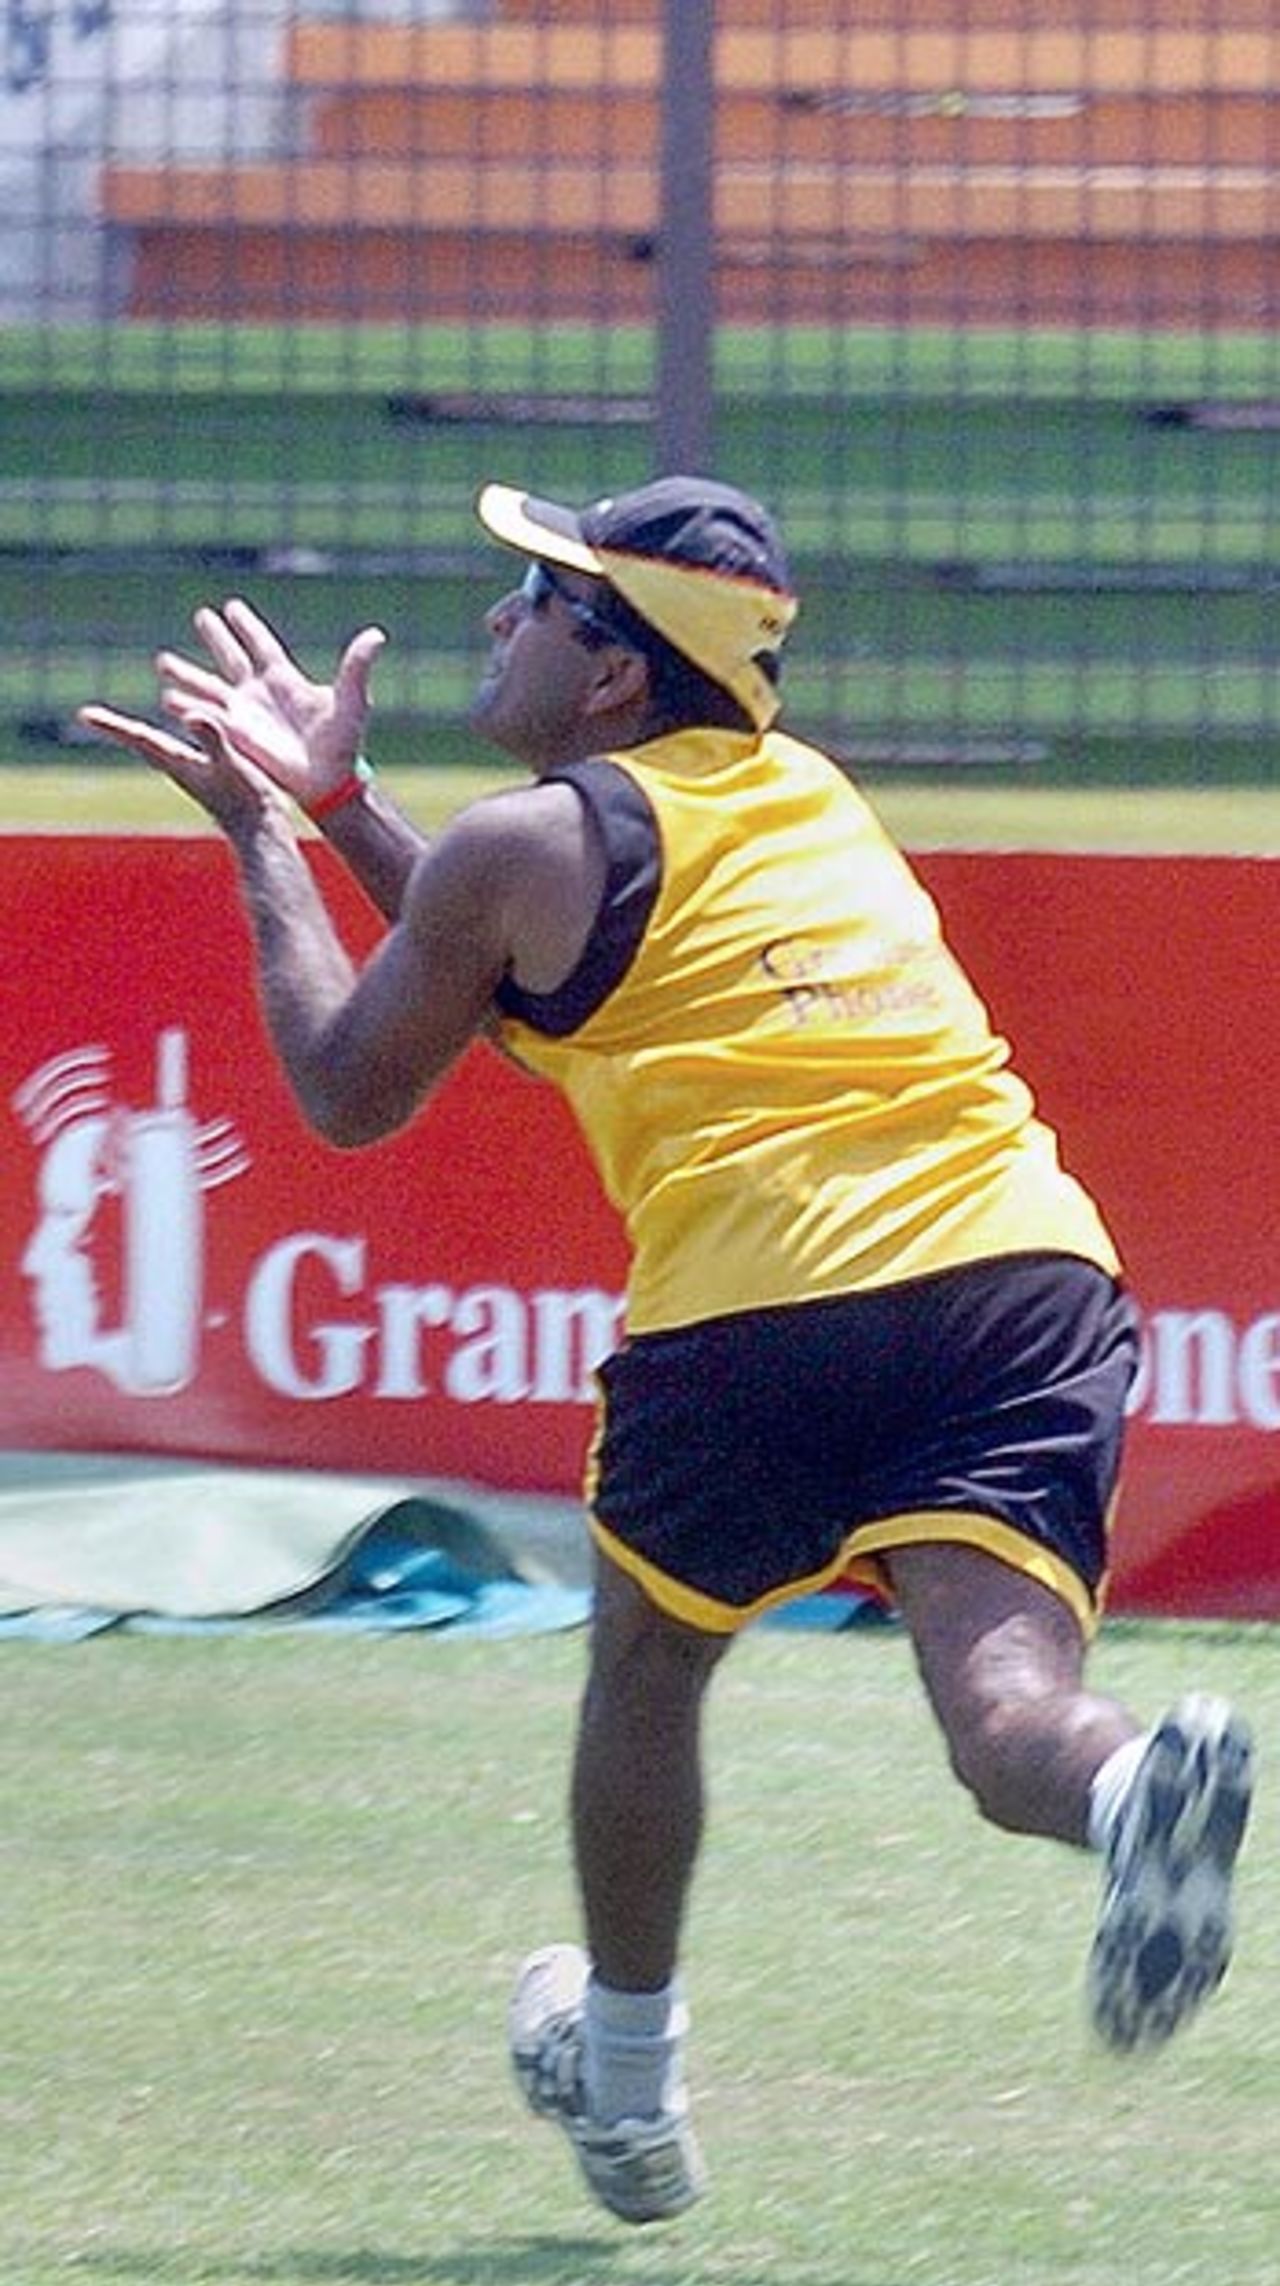 Javed Omar prepares to take a catch during practice at the Chittagong Divisional Stadium, Chittagong, April 21, 2006